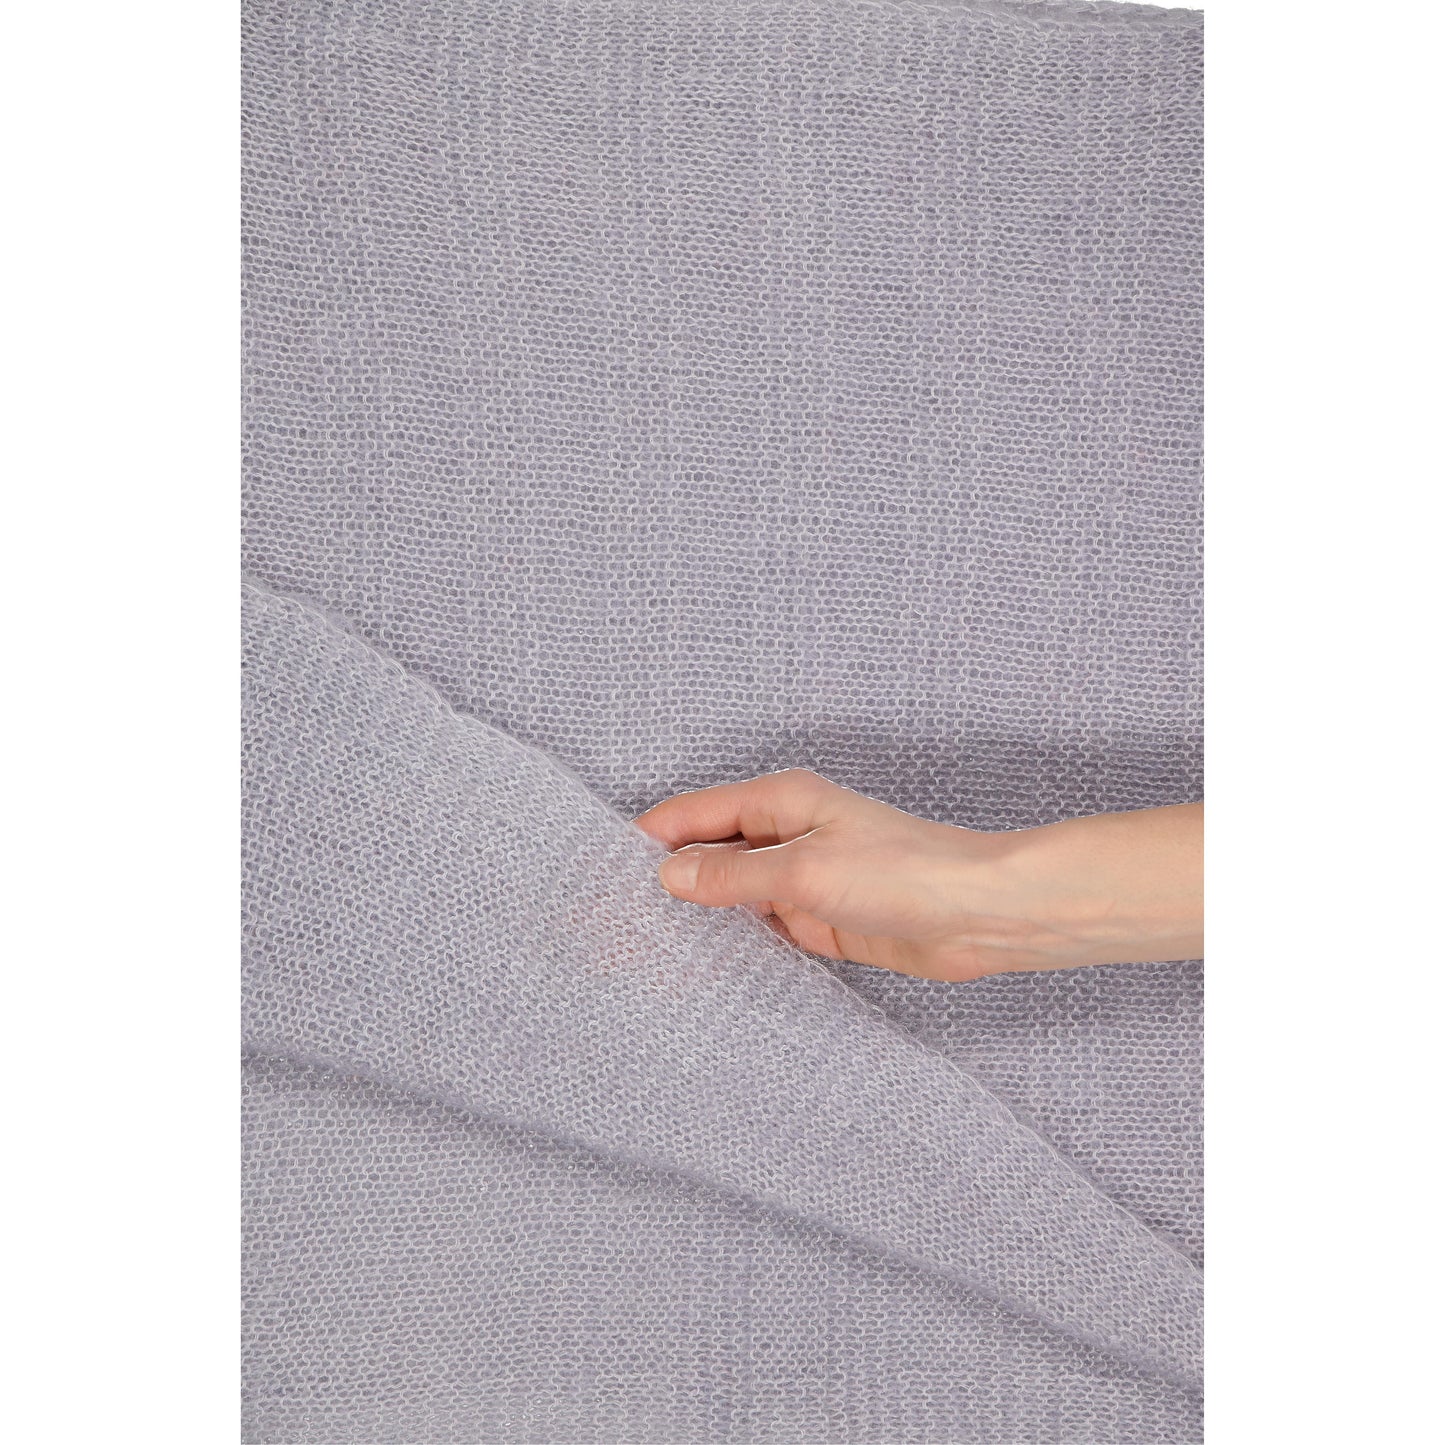 BRUME - a cosy scarf PEARL GREY